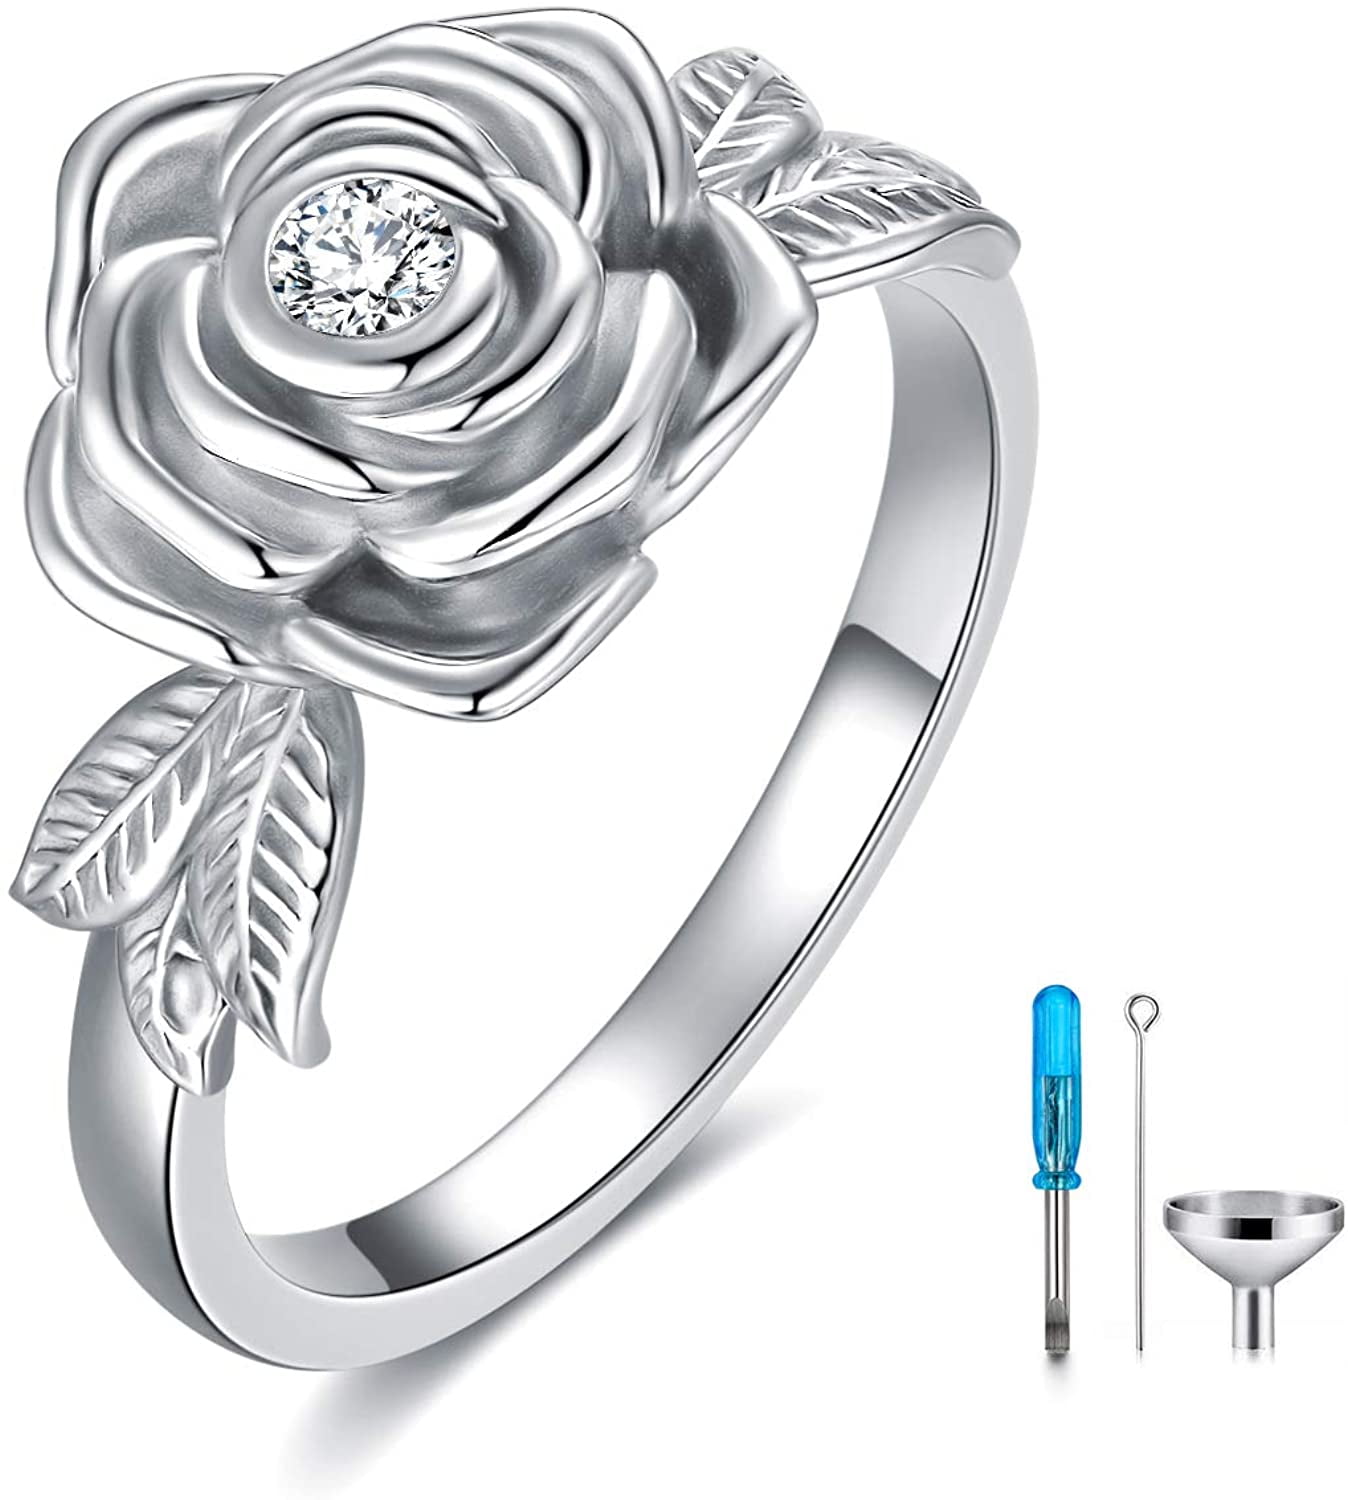 Oxidized Rose Flower Romantic Cute Ring New .925 Sterling Silver Band Sizes 6-8